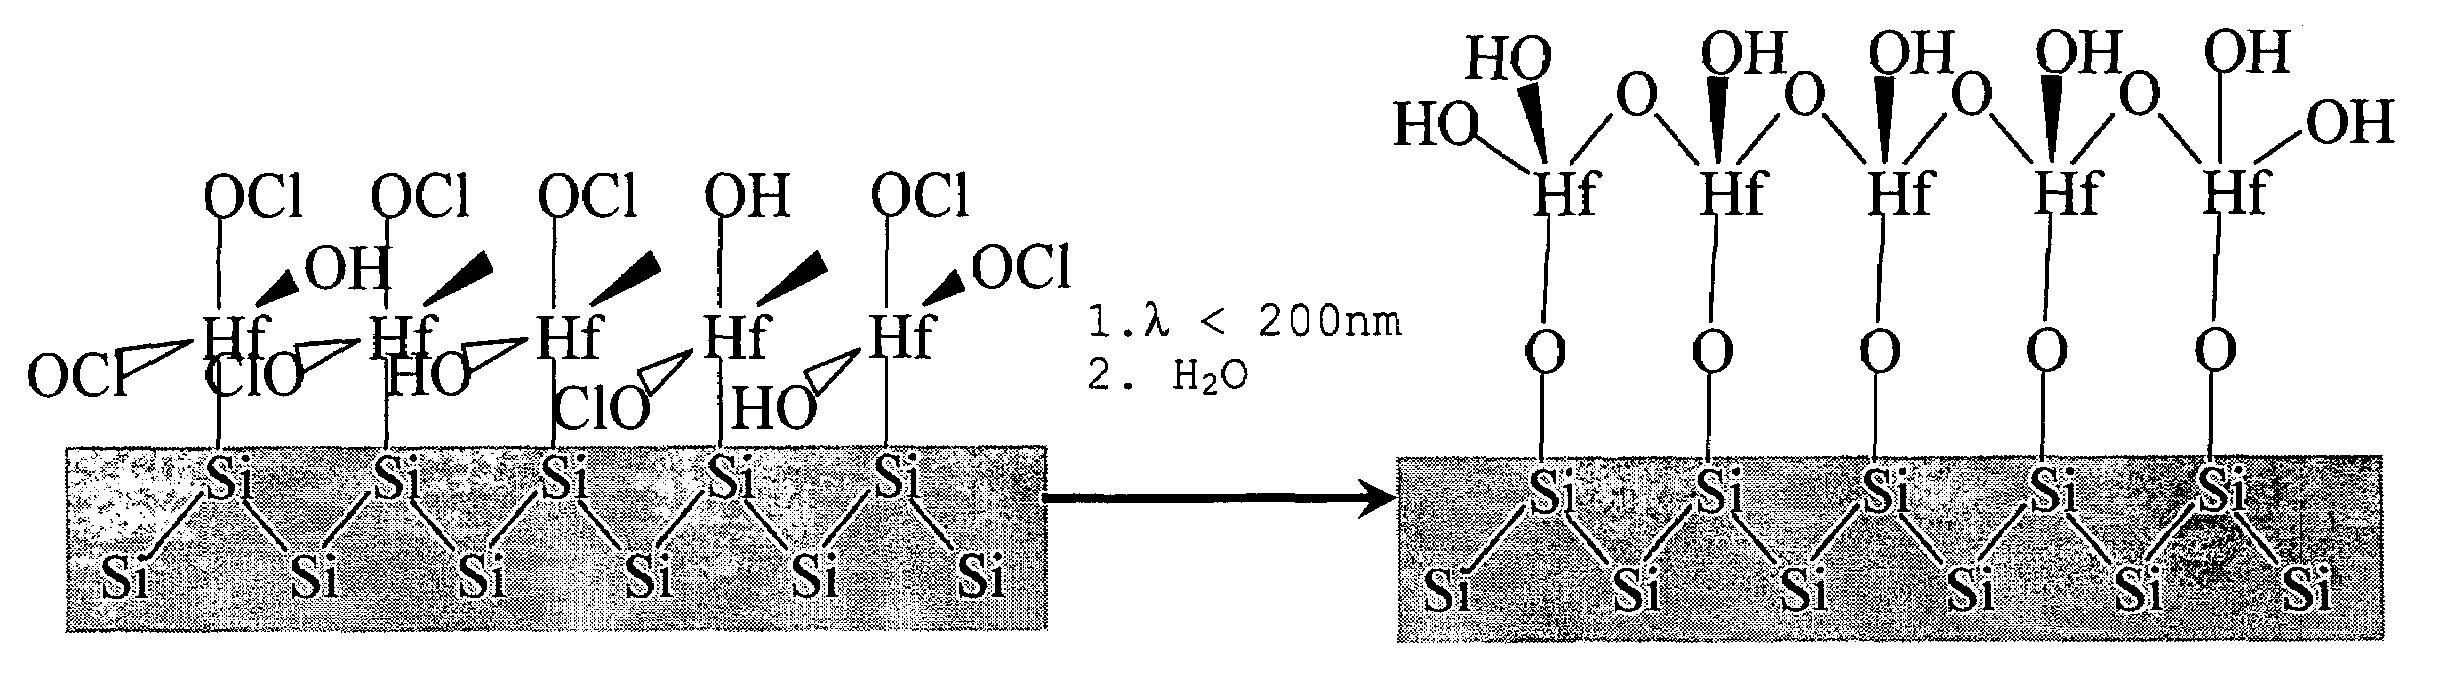 Atomic layer deposition method for depositing a layer